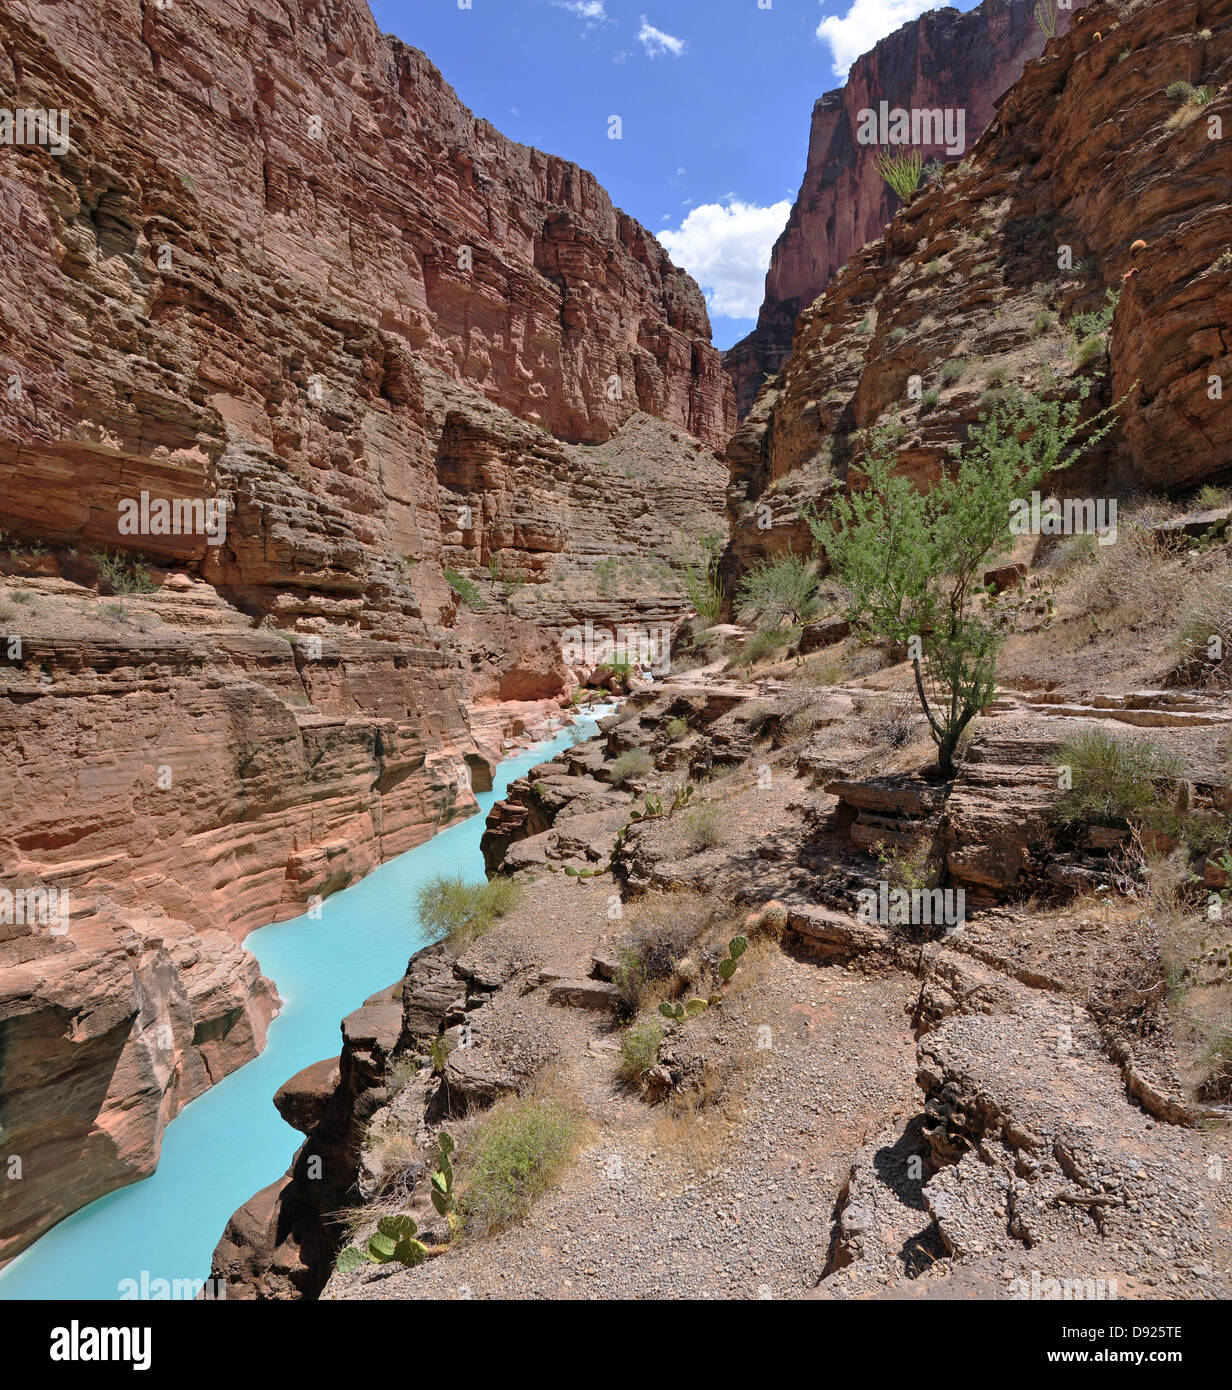 The blue-green water of Havasu Creek at the confluence with the Colorado River at river mile 157 in the Grand Canyon National Park. The turquoise color is caused by water with a high mineral content. Stock Photo